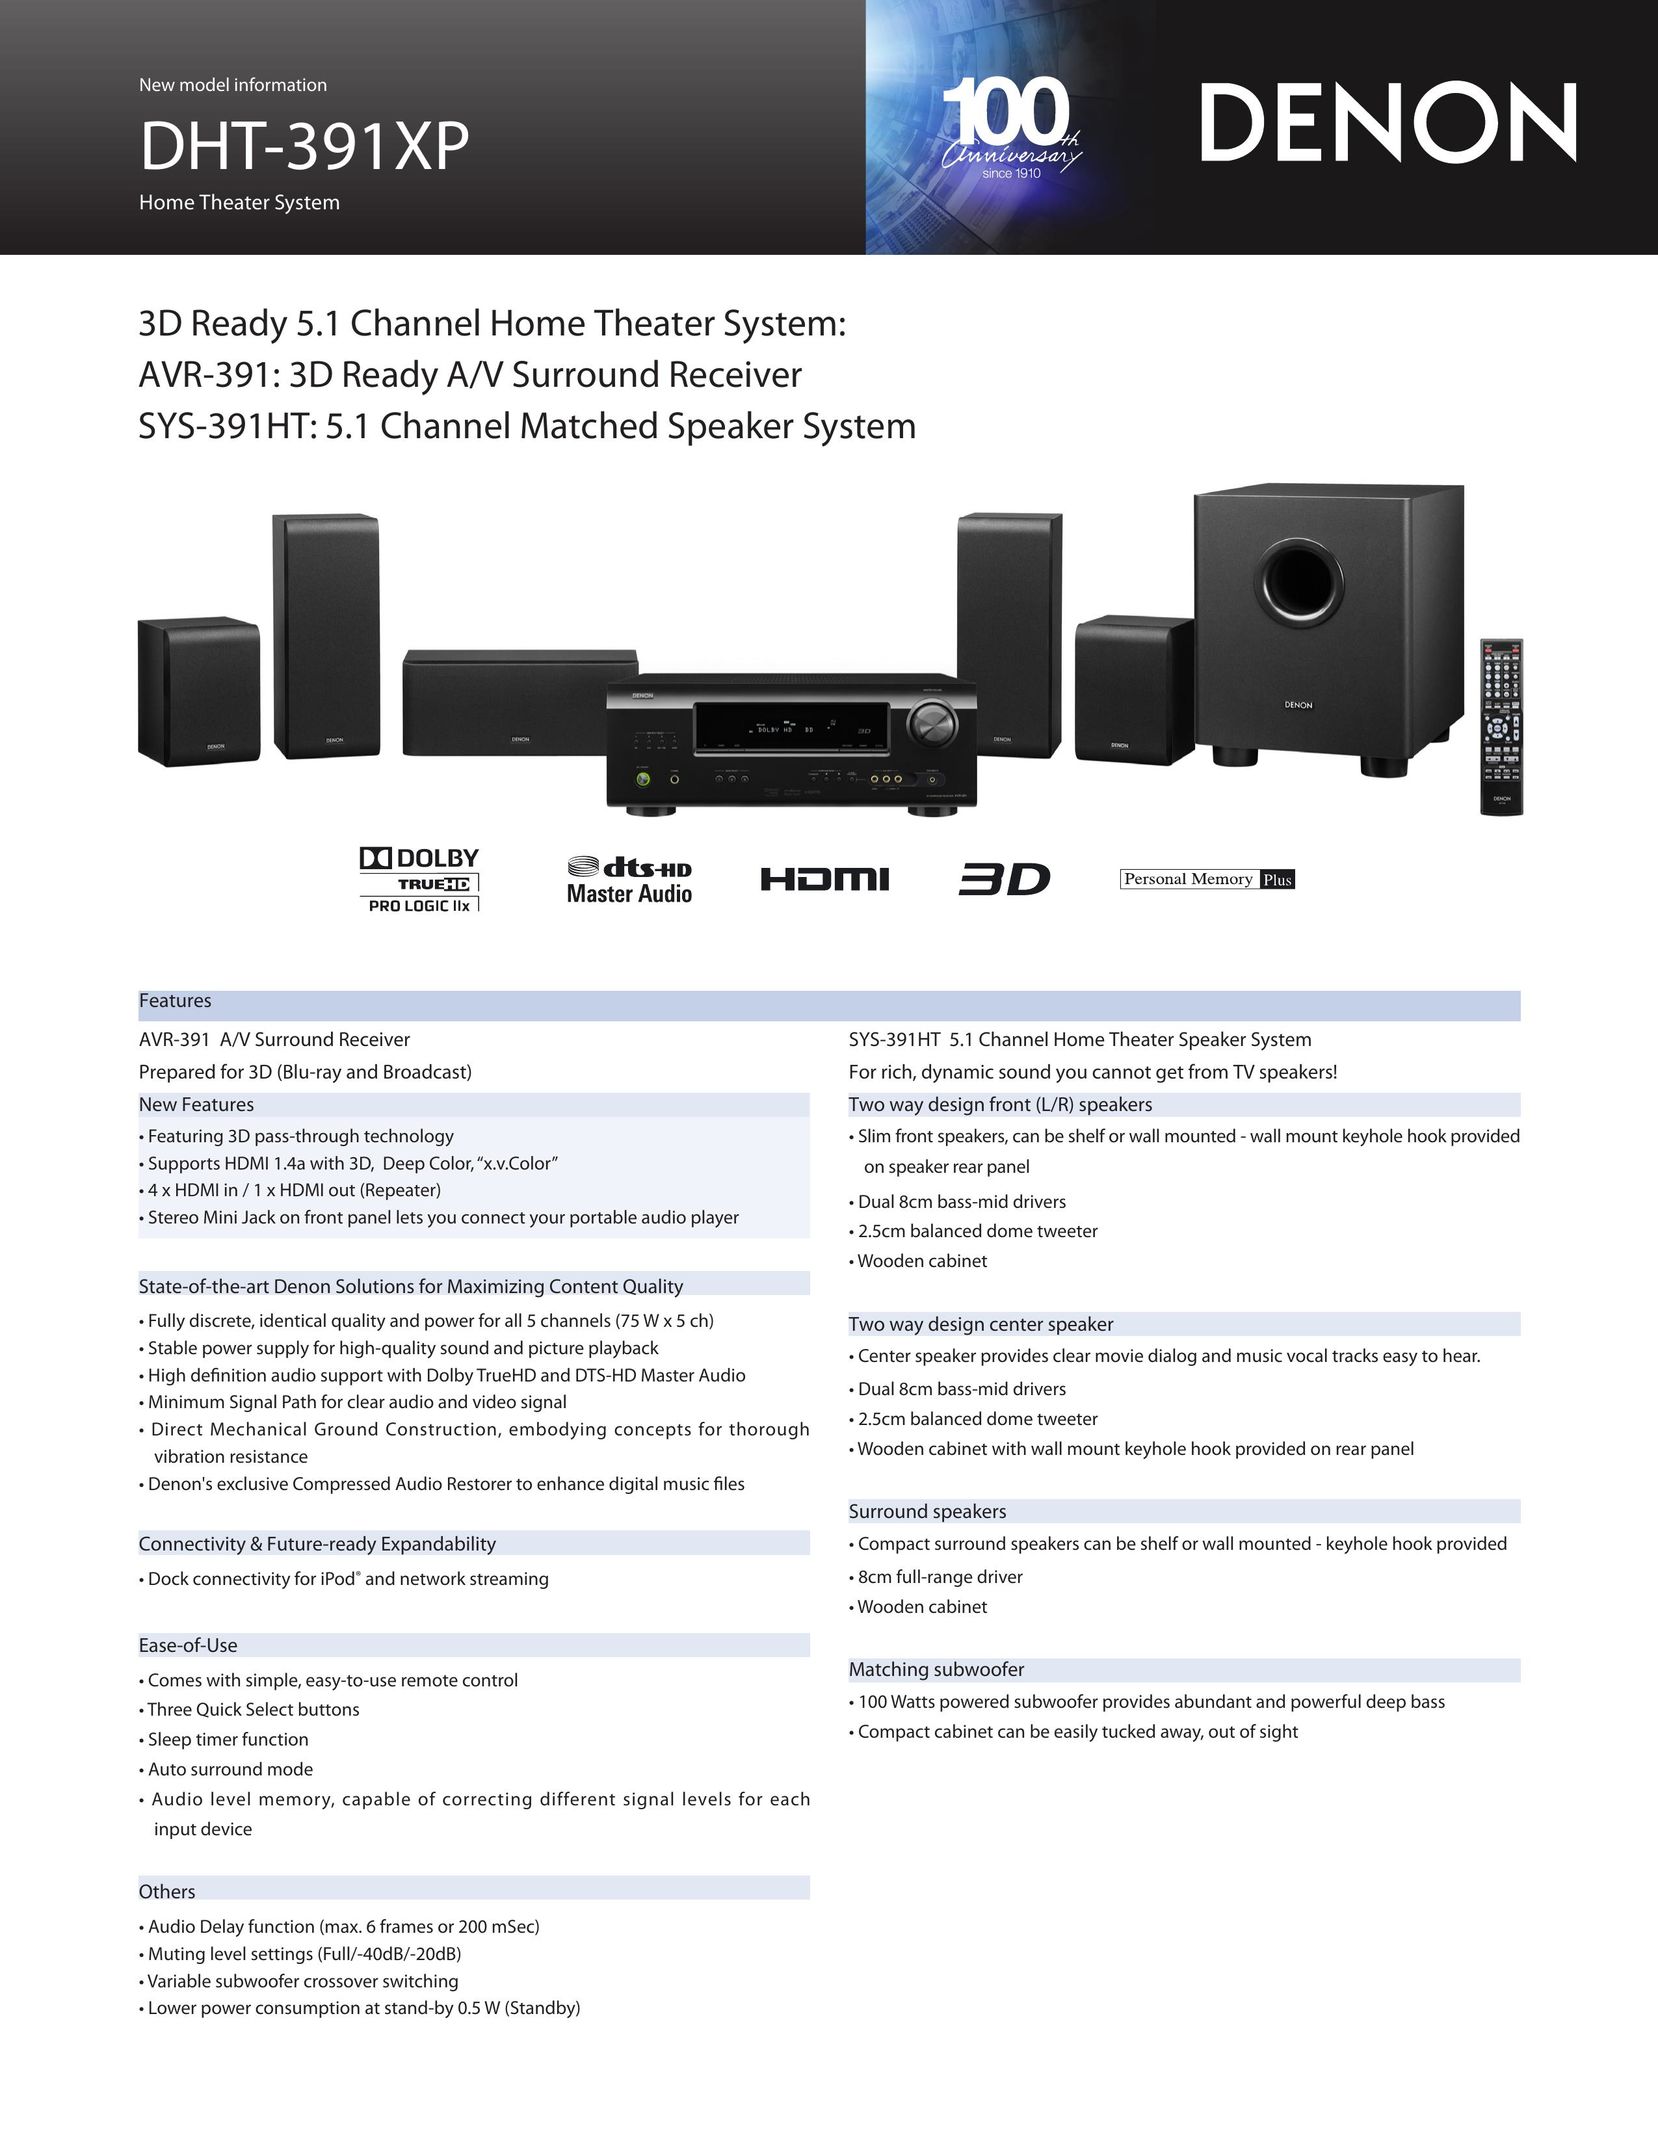 Denon DHT-391XP Home Theater System User Manual